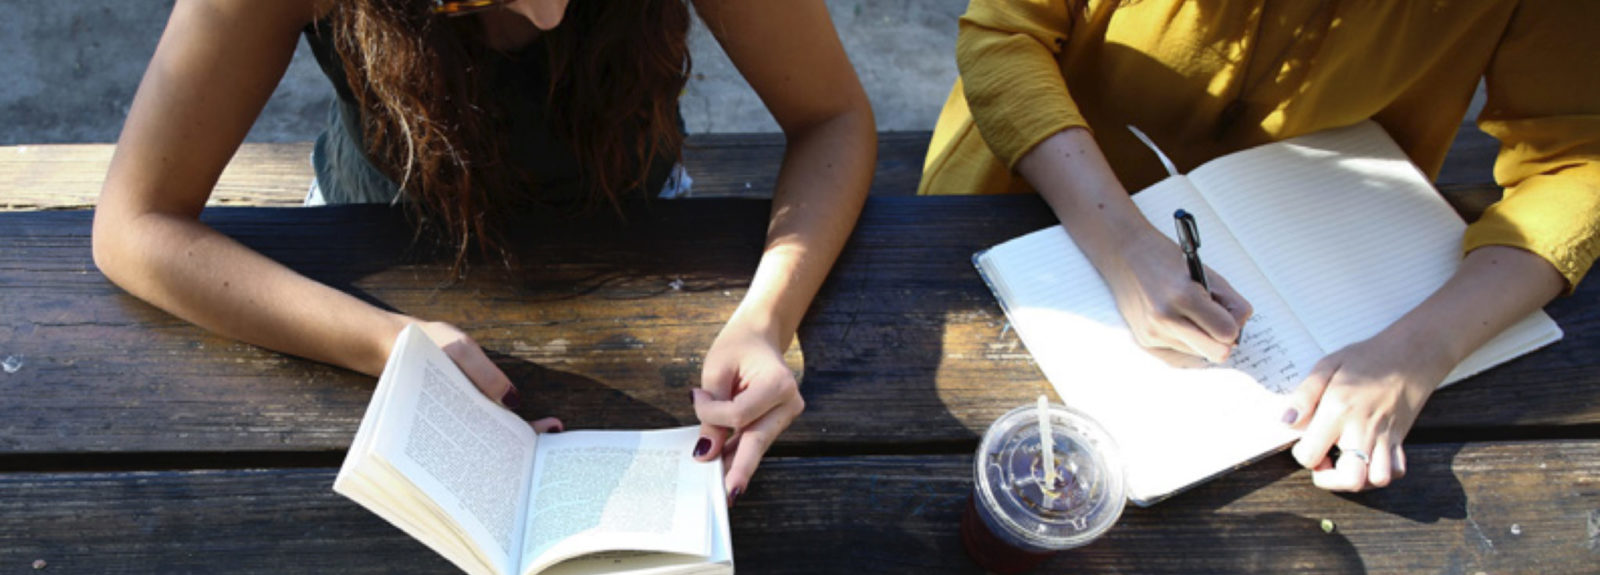 Website development placeholder image of two young woman studying